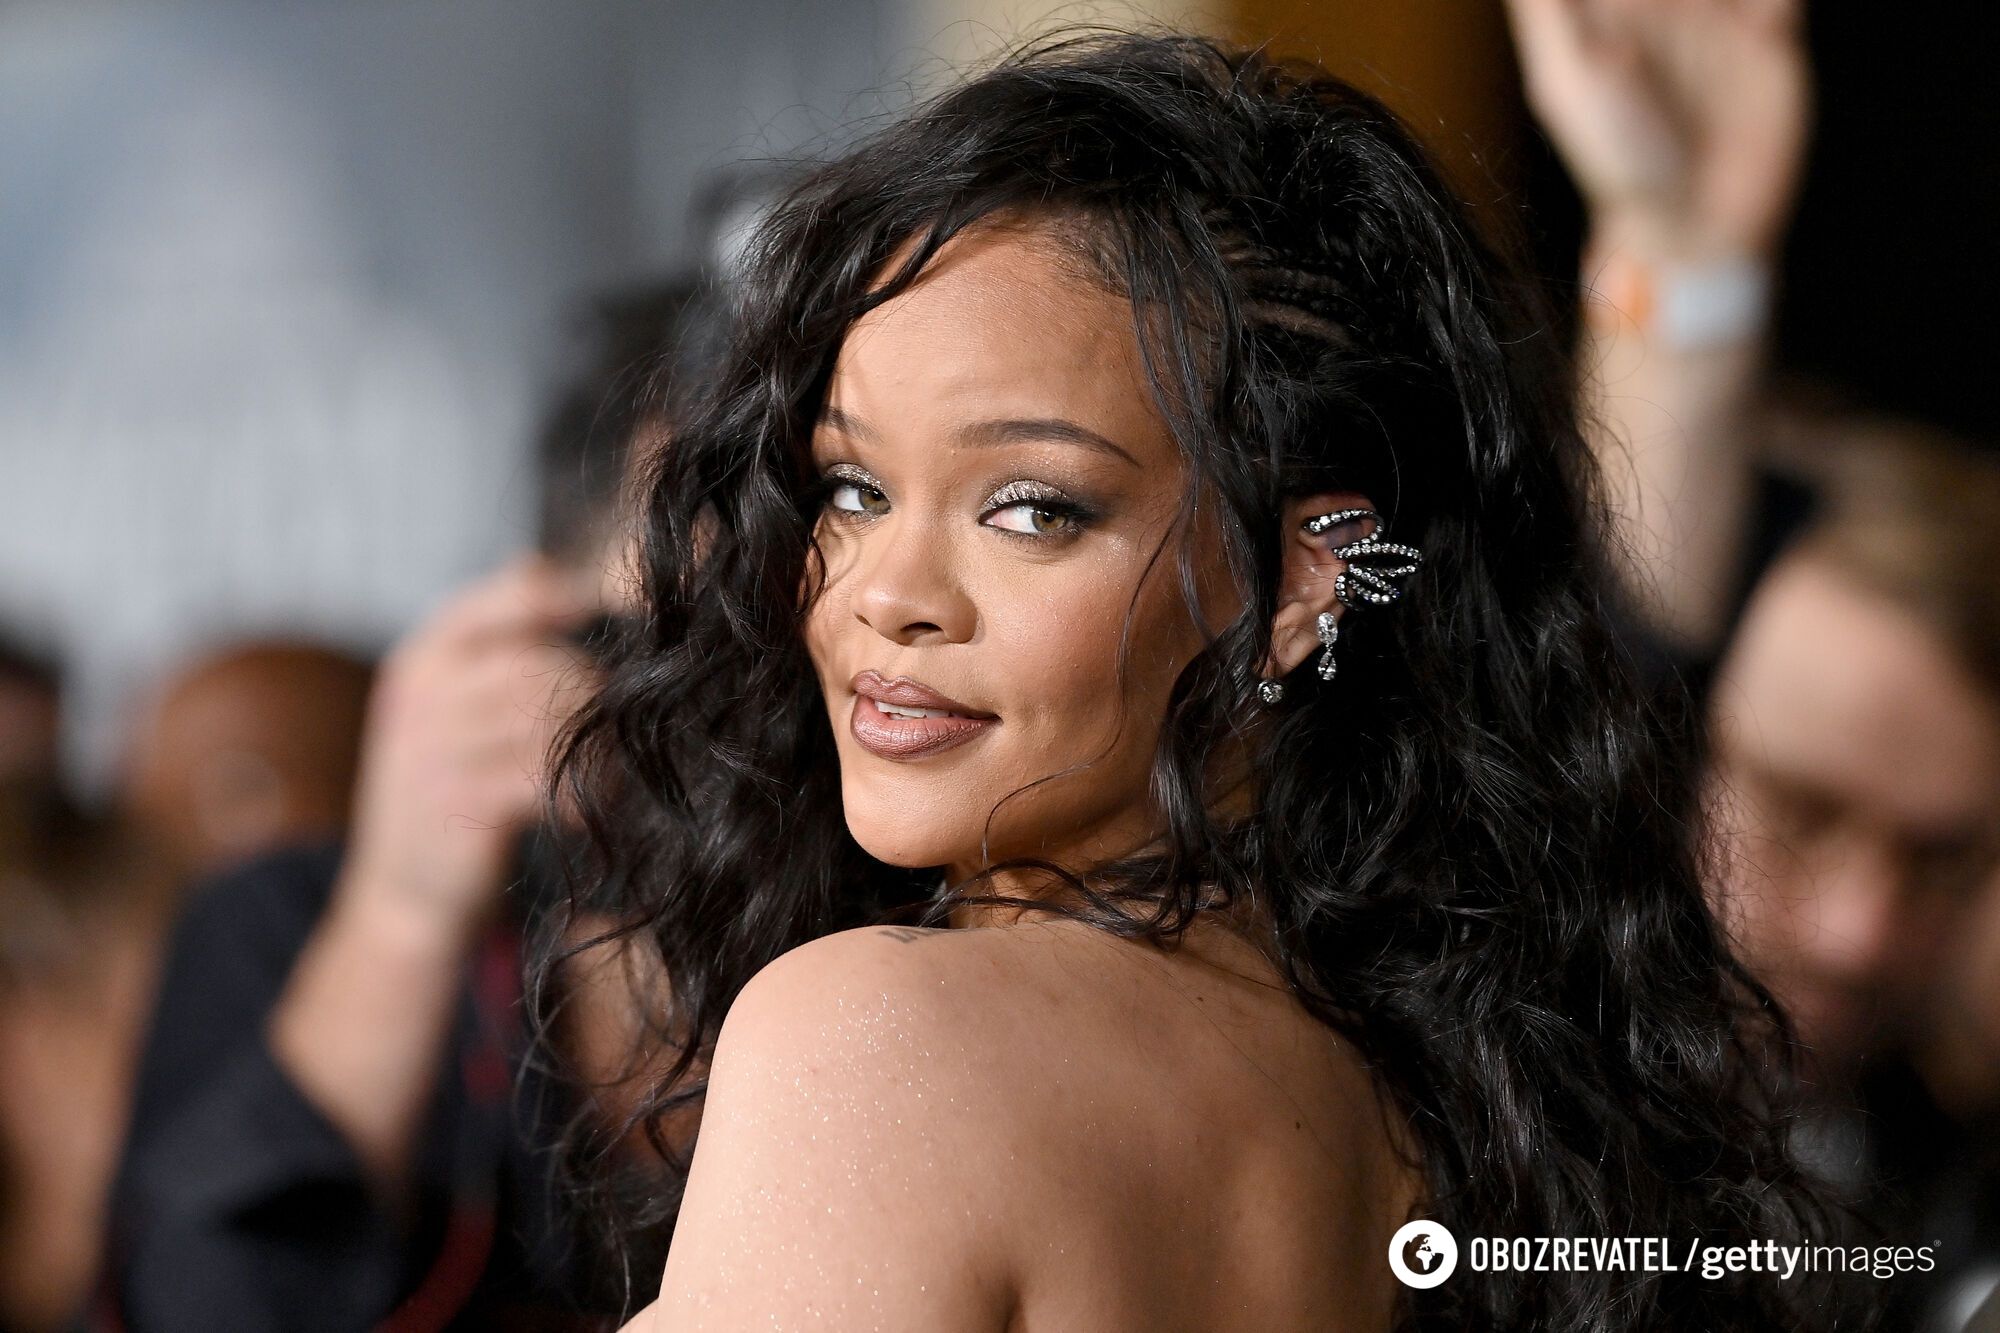 Blonde curls and short hairstyle: what Rihanna looks like without a wig. Photo